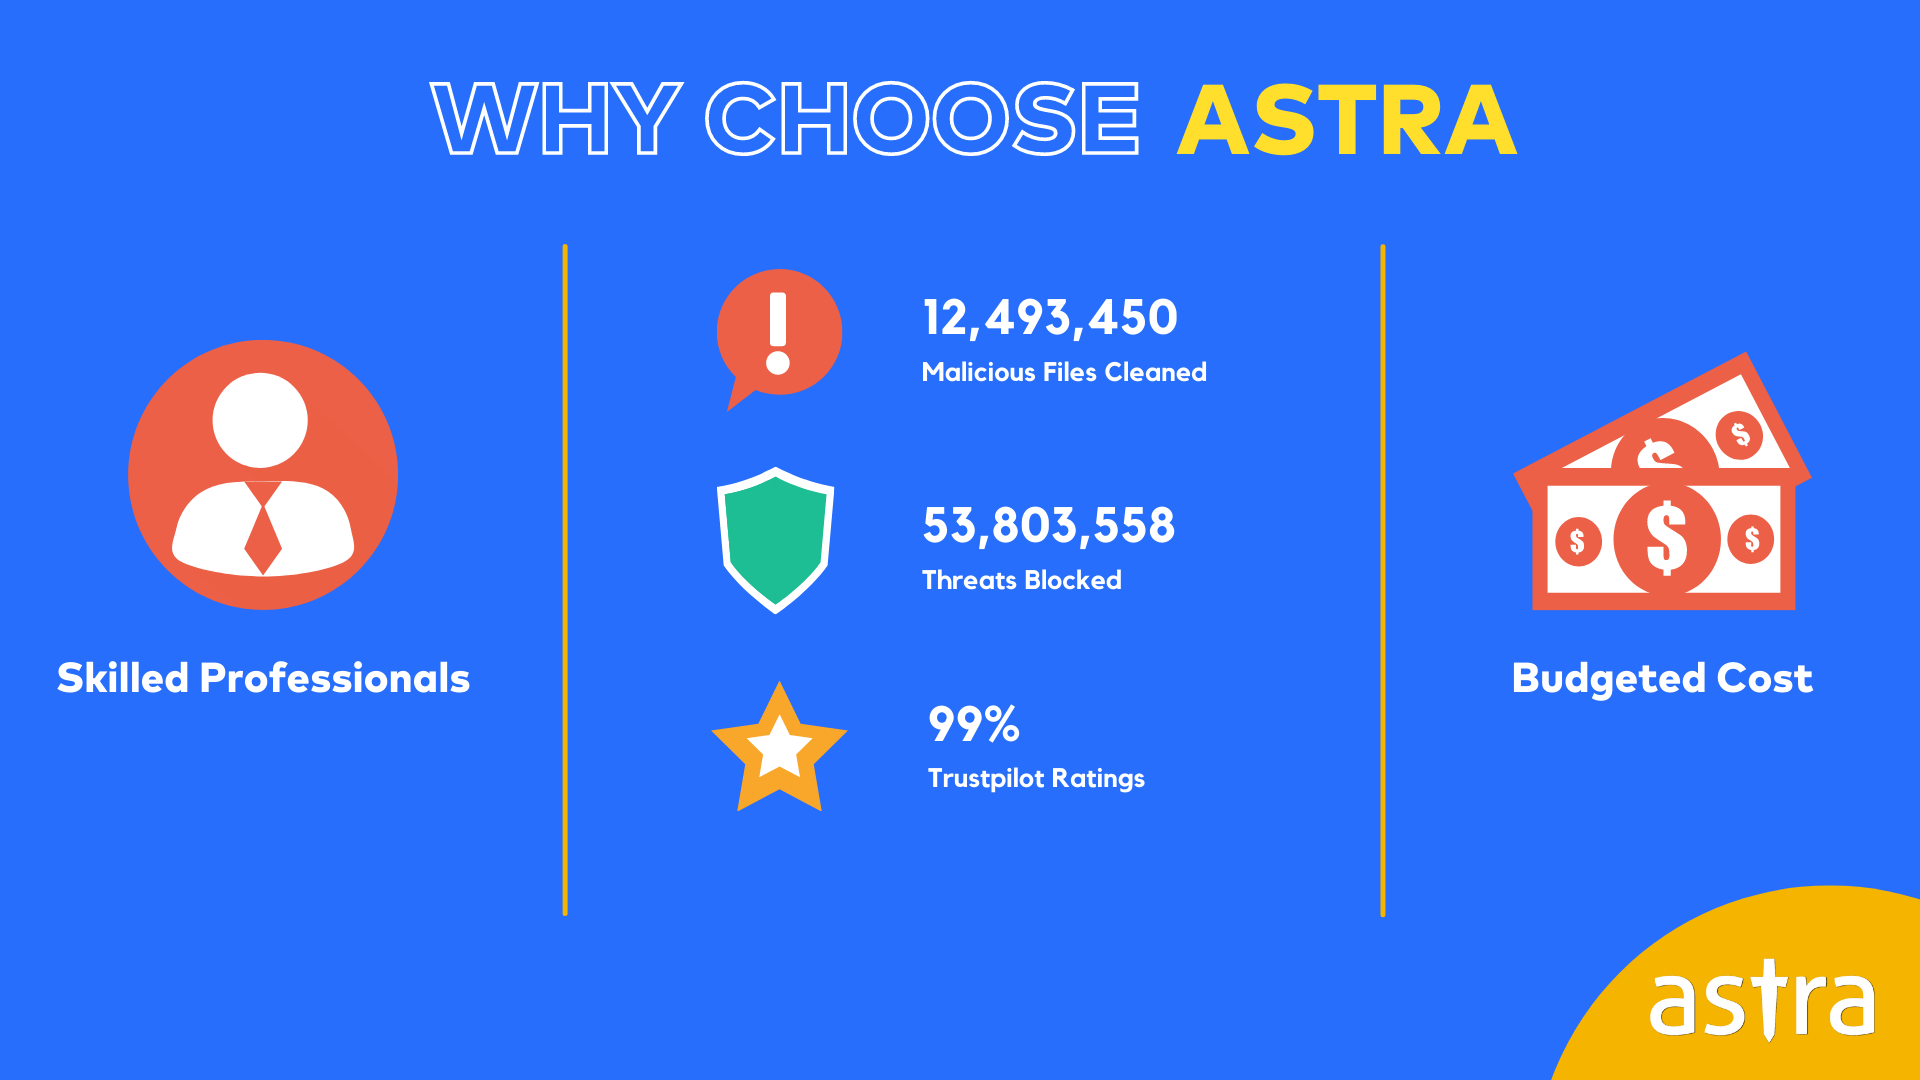 Why Choose Astra